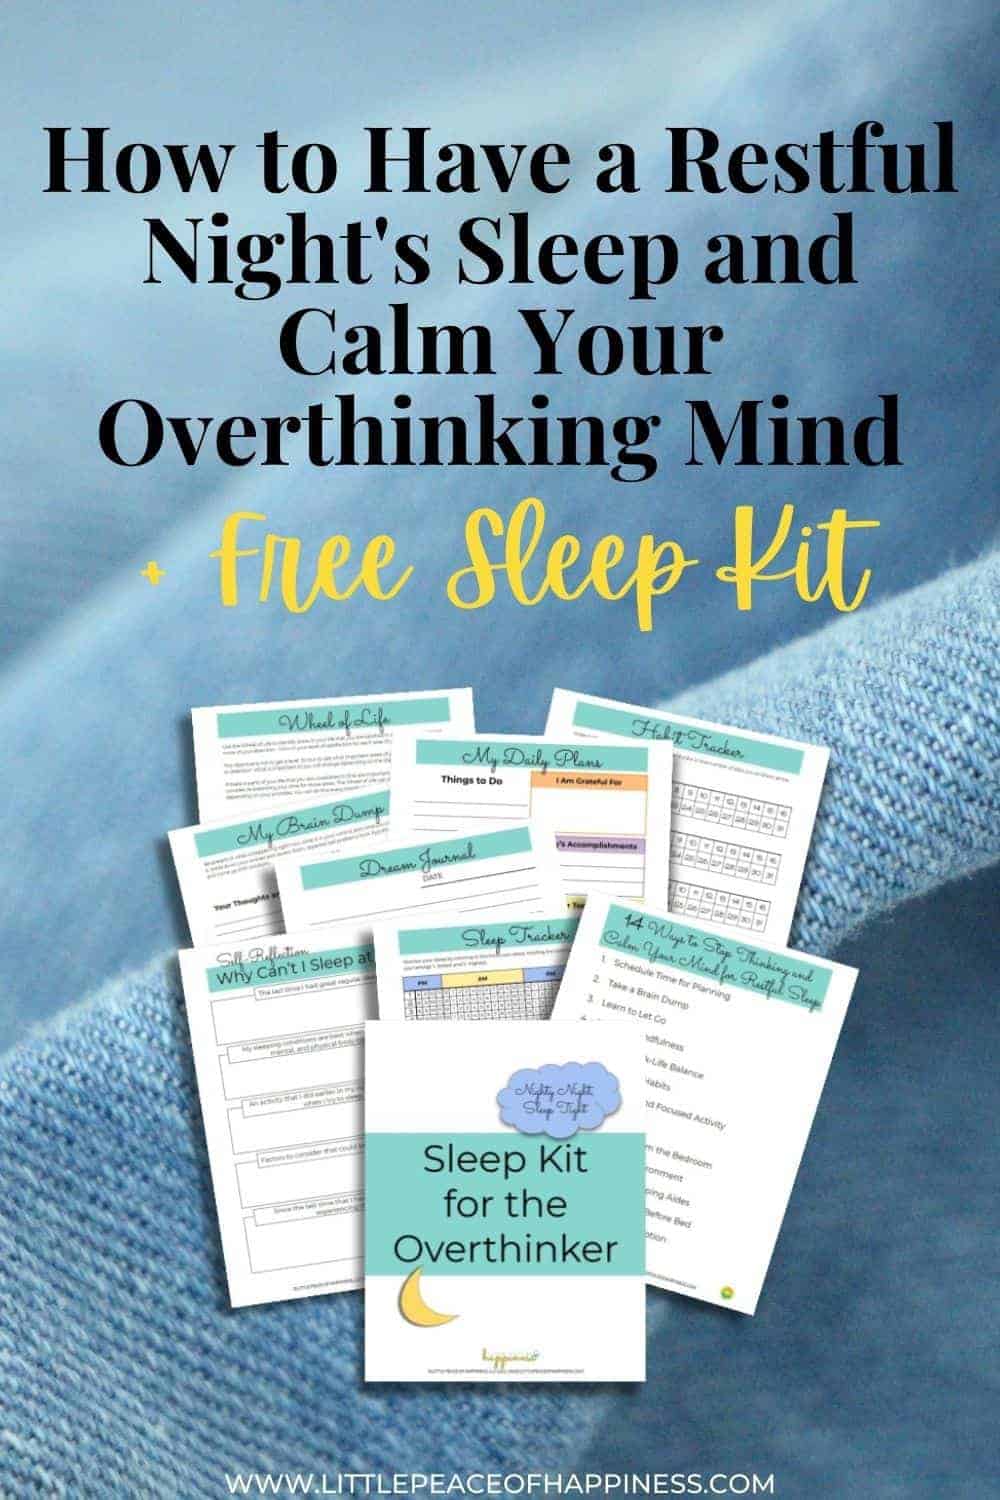 How to have a restful night's sleep and calm your overthinking mind and free sleep kit